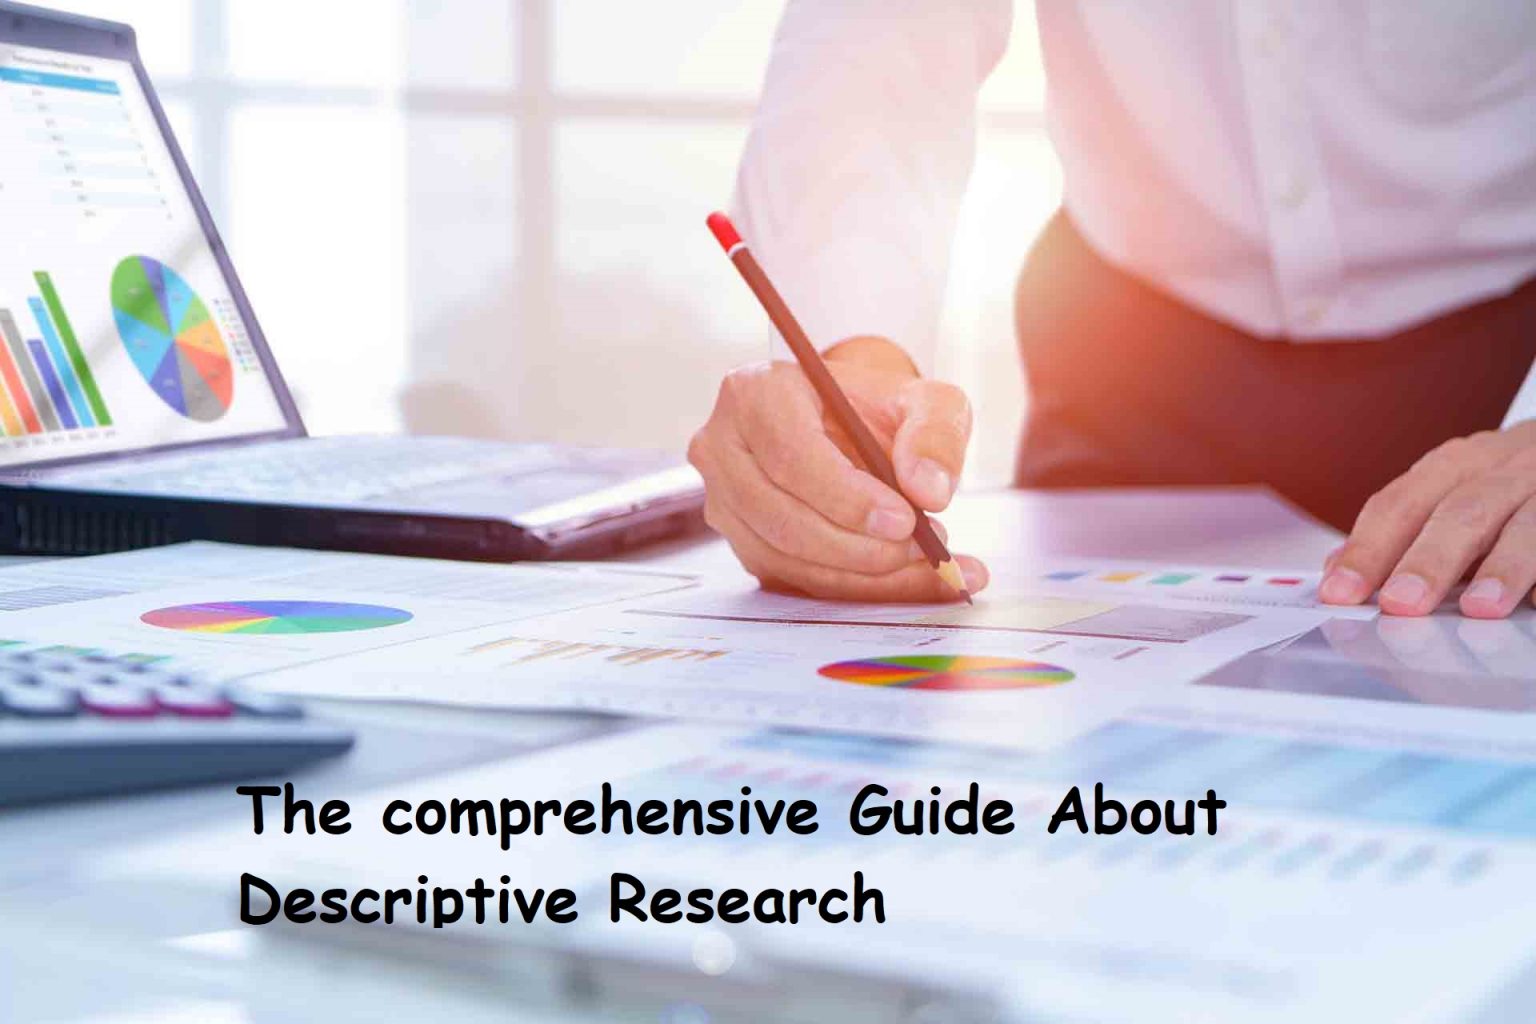 descriptive research is best known as